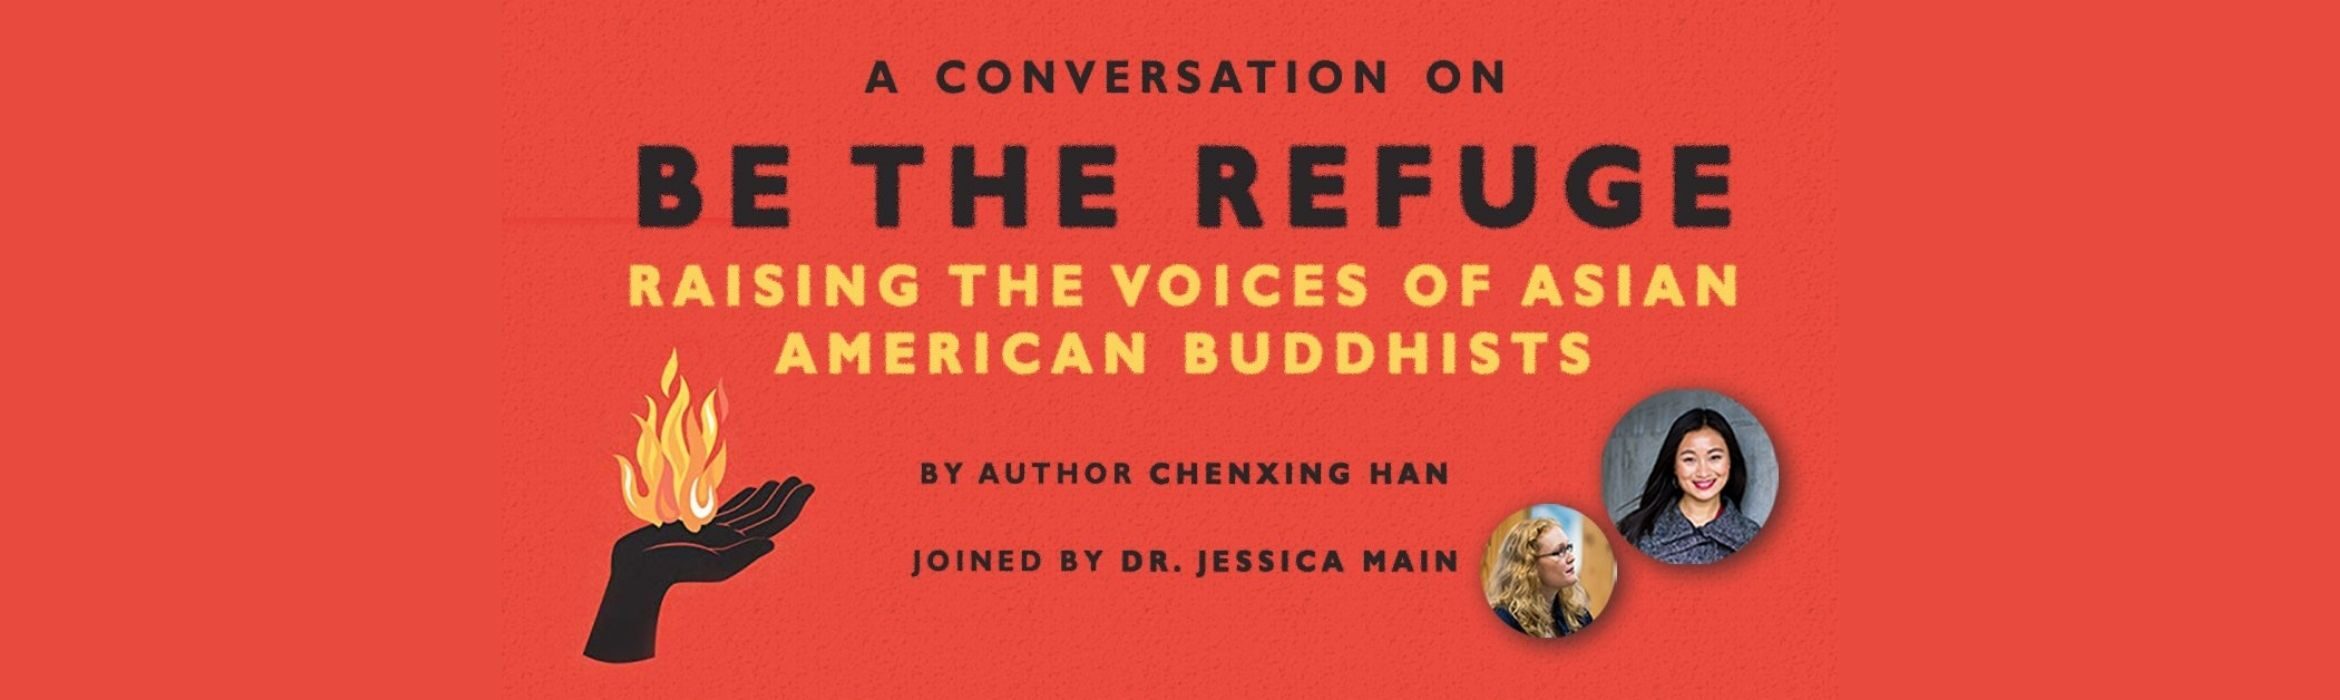 Webinar: Be the Refuge: Raising the Voices of Asian American Buddhists